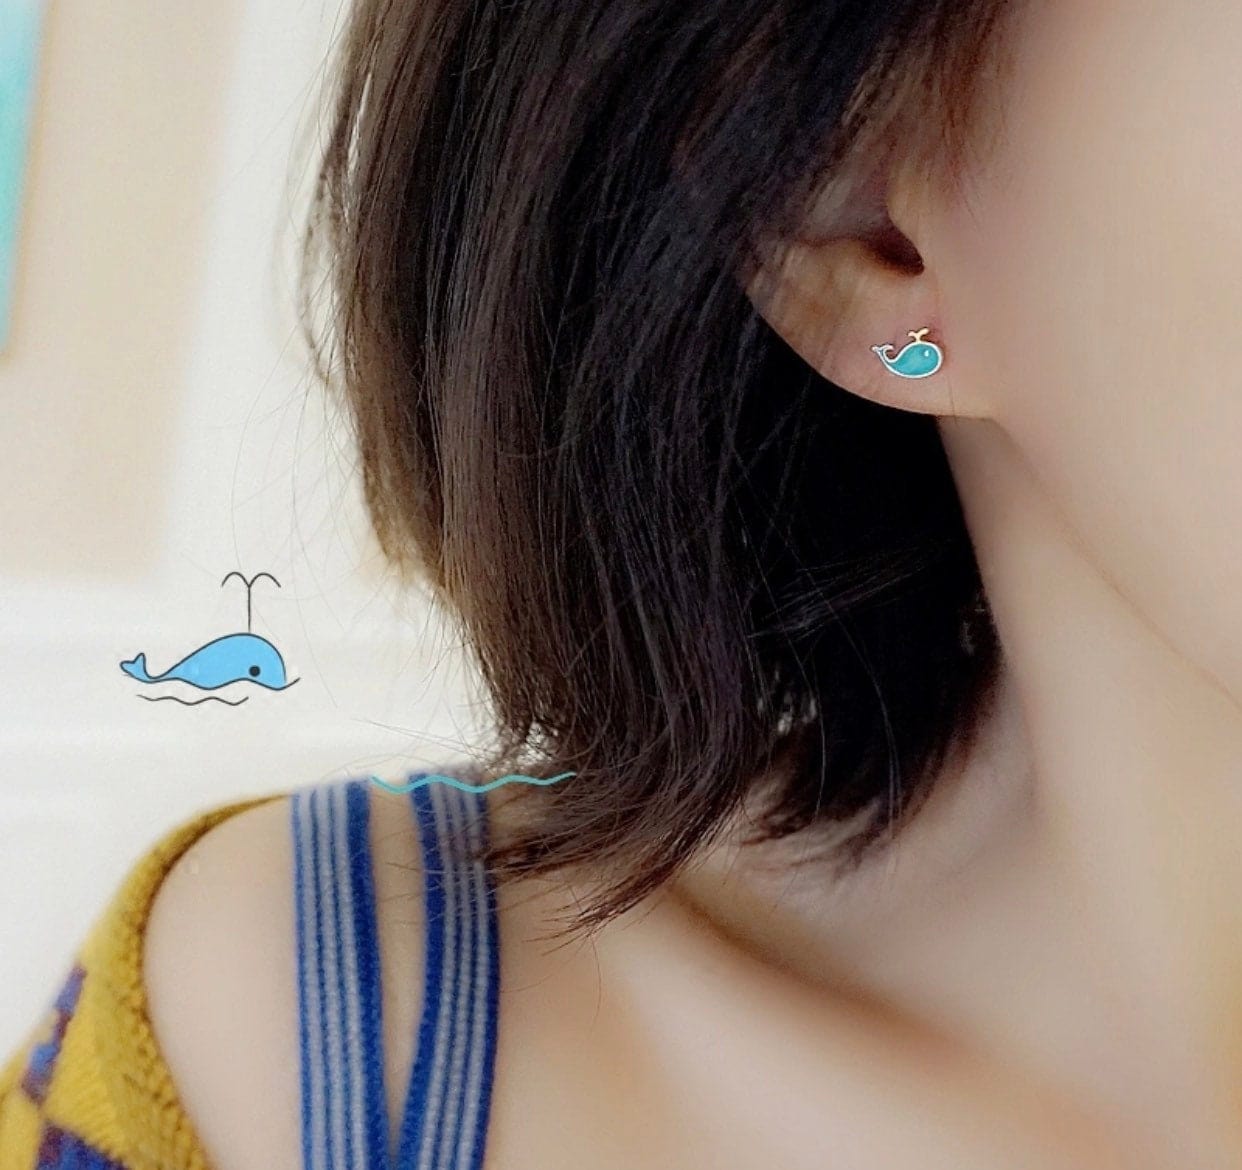 whale stud earrings, tiny whale stud,blue fish earring,925 silver needle stud,mini blue whale stud, unique animal earring,gifts for kids - Jade Sprite Design